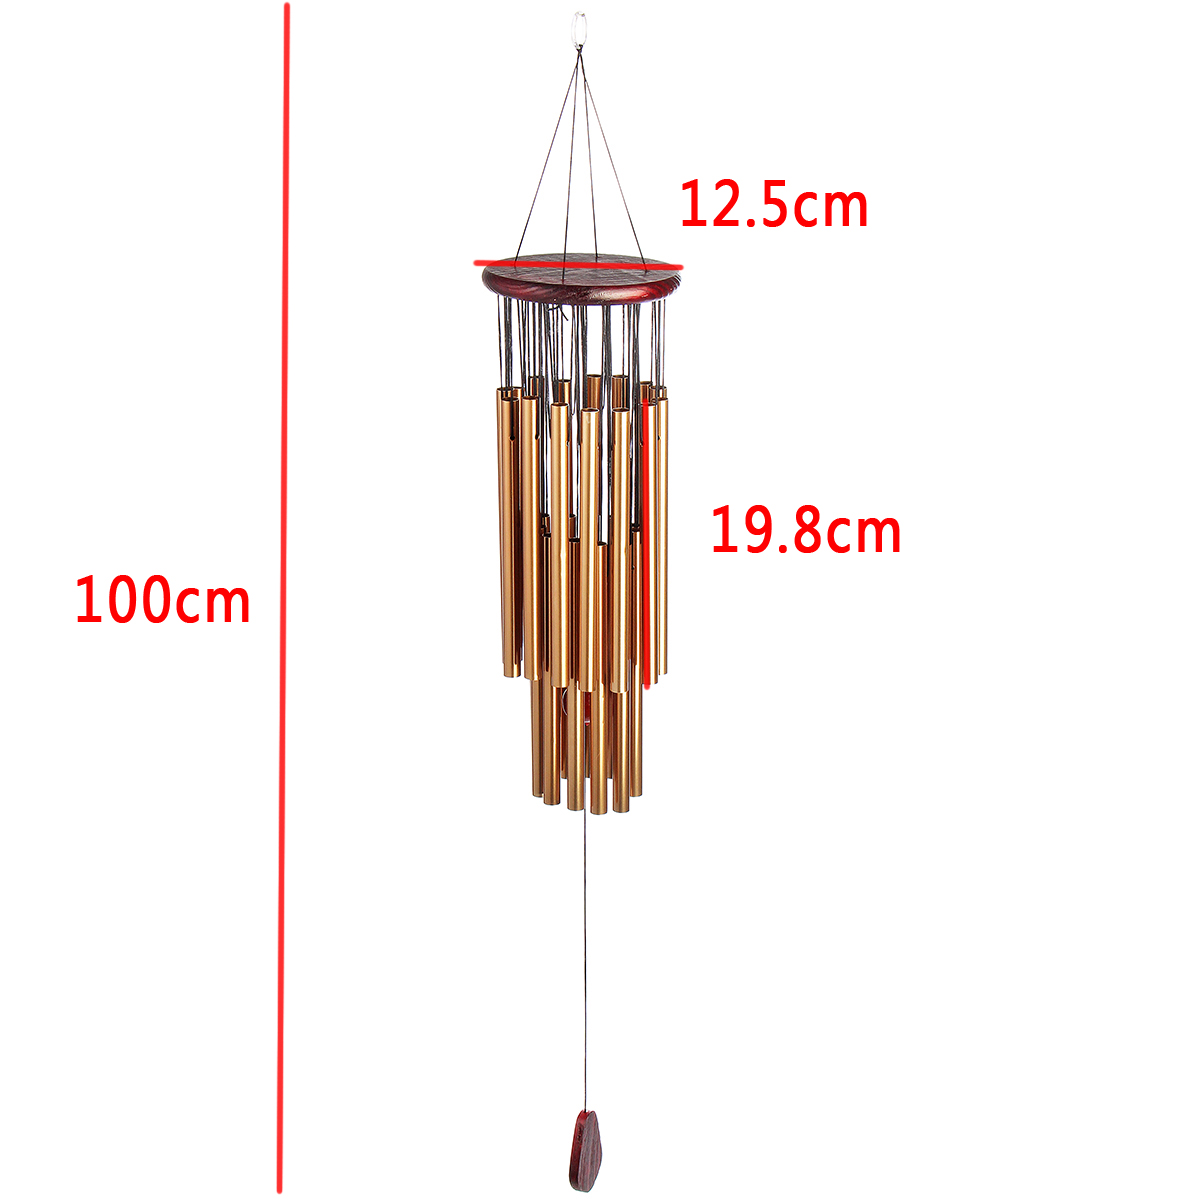 1 Pc Wind Chime 8 Tubes Bronze Metal Professional Gift for Yard Outdoor Garden